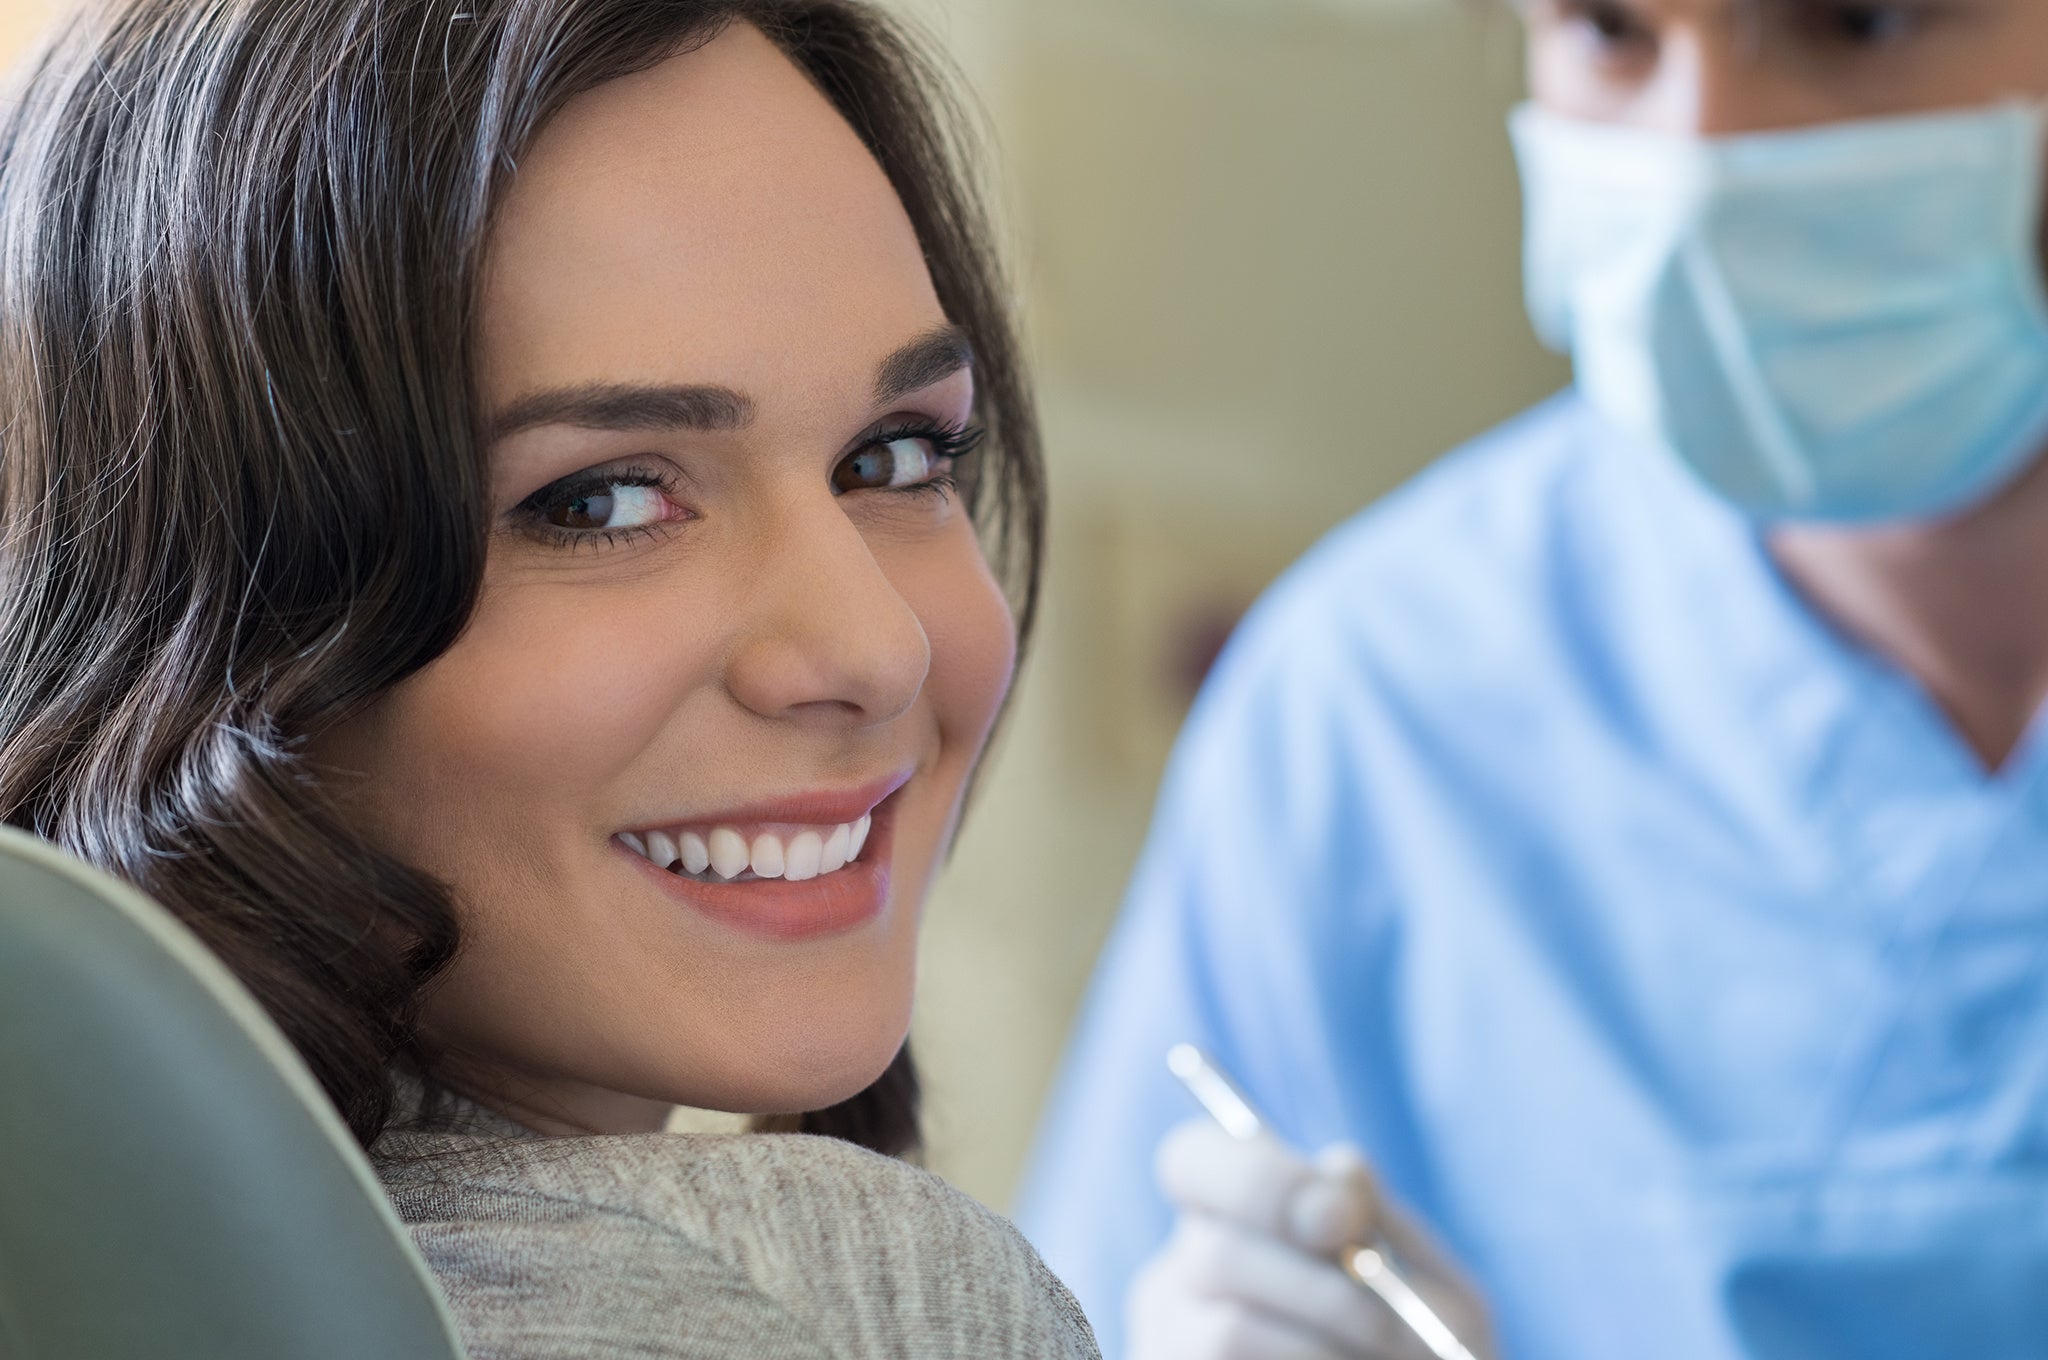 Smiling young woman at dentist office